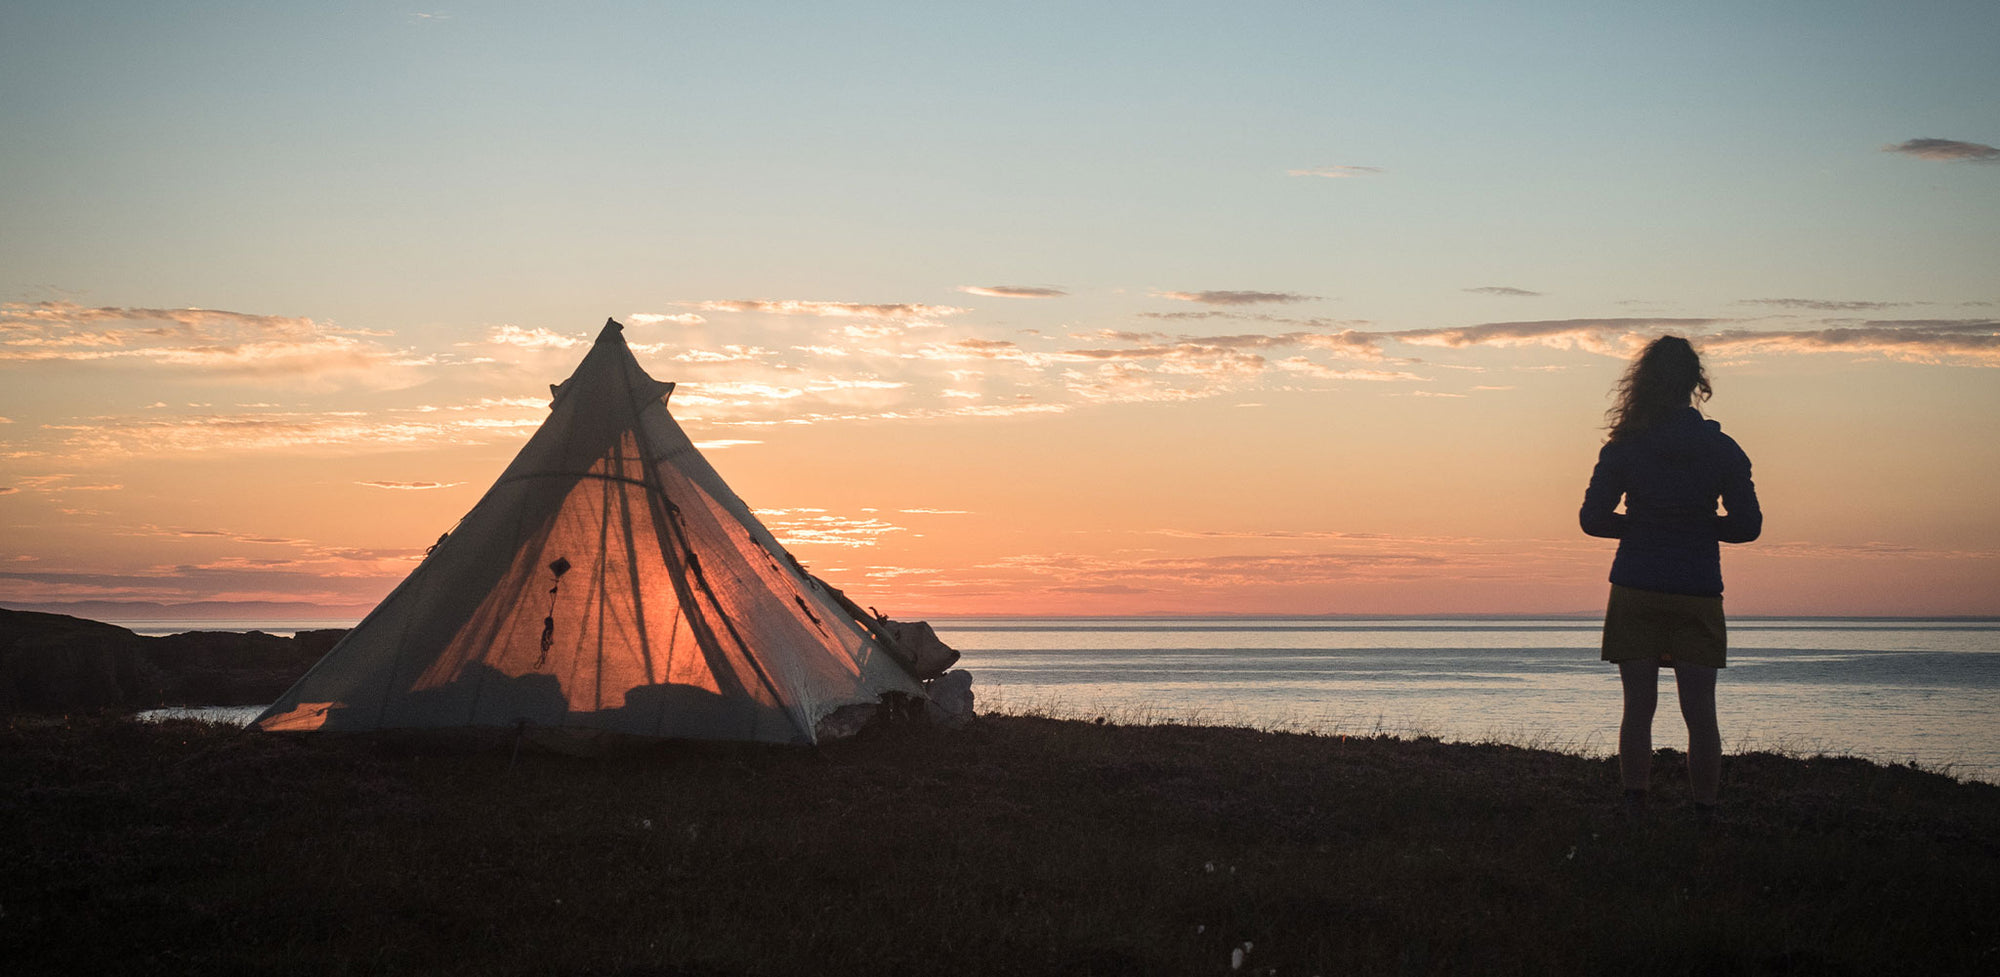 A person standing in front of a teepee at sunset.